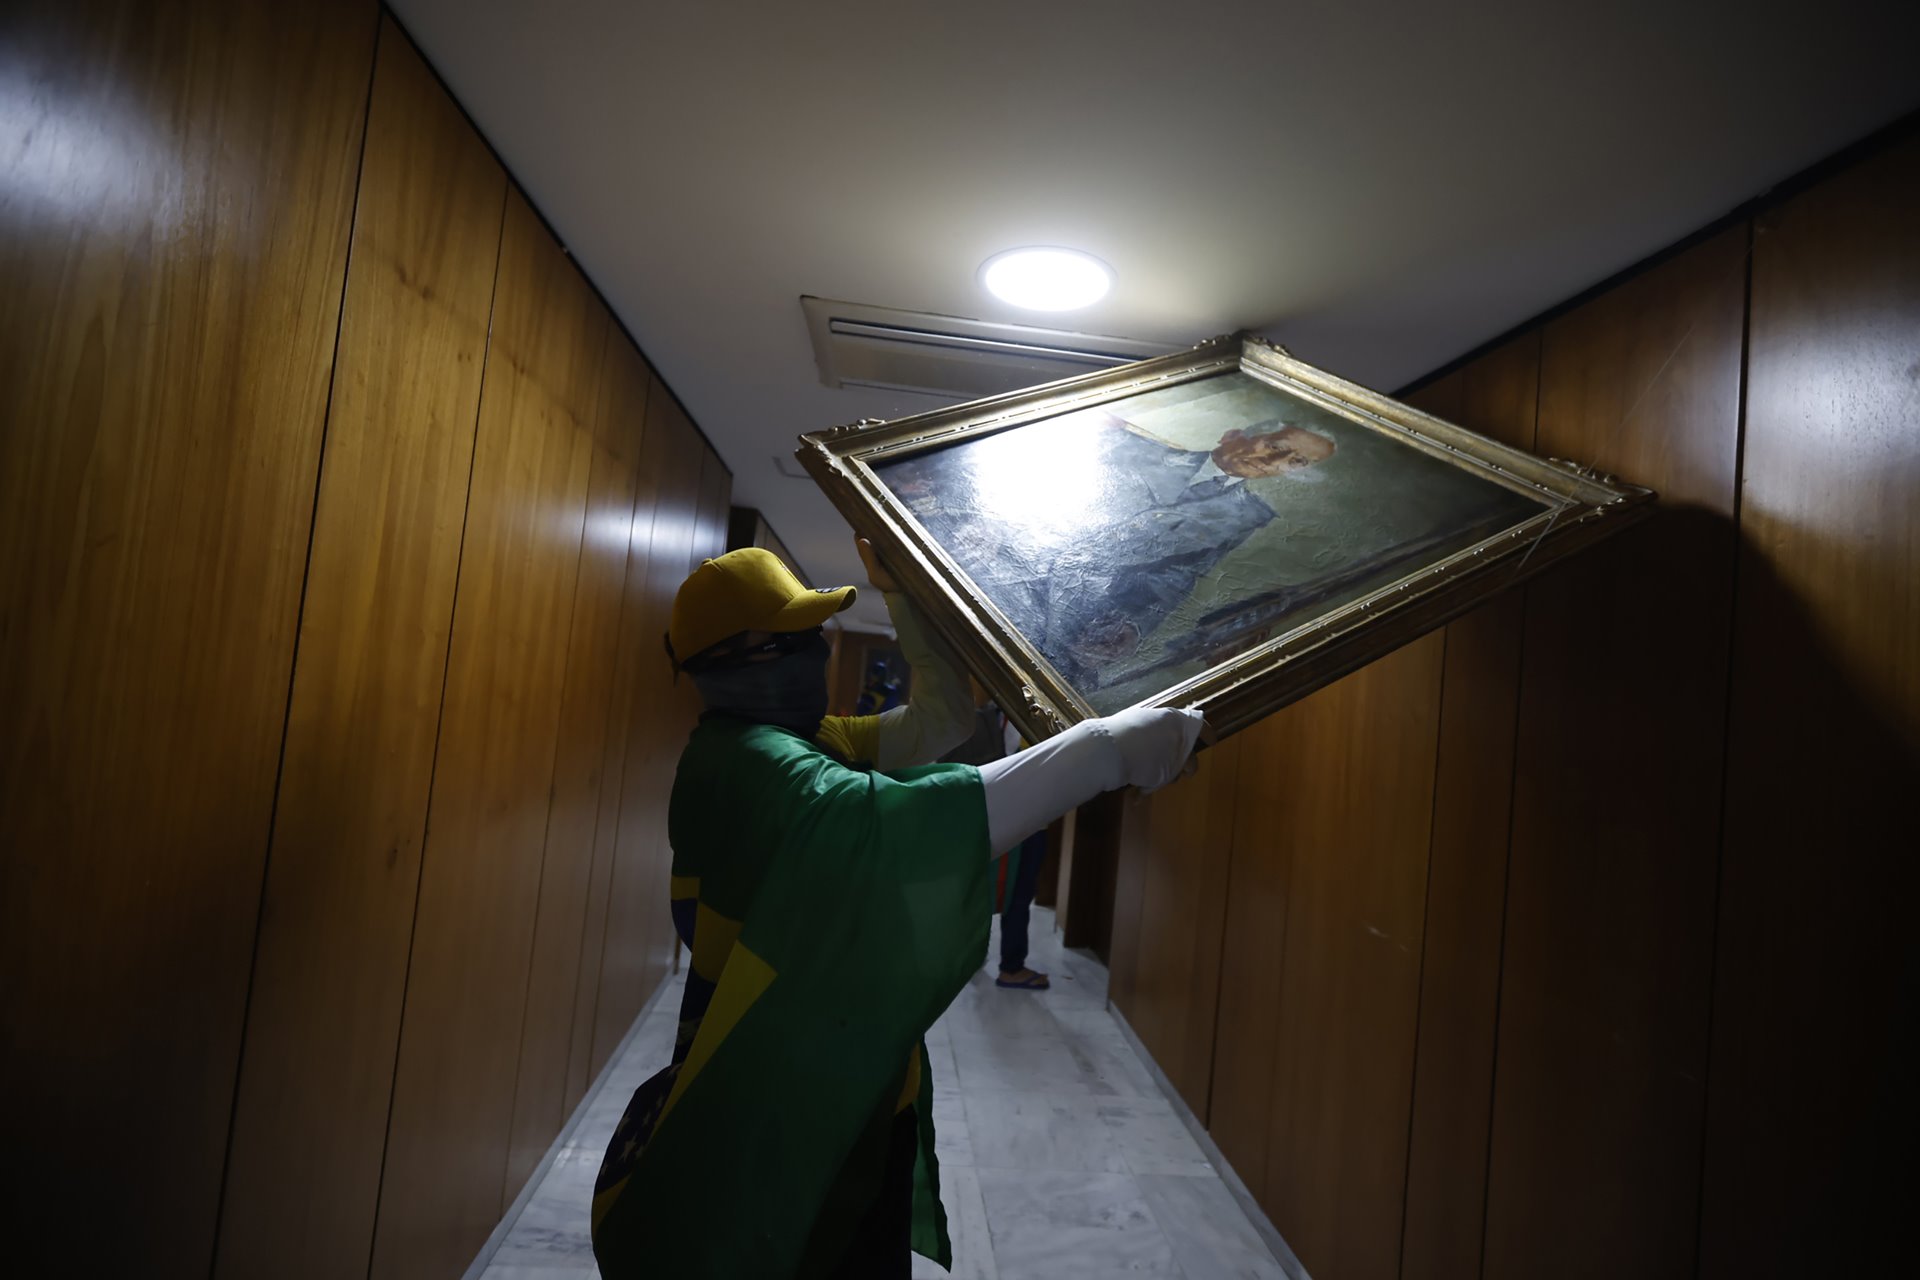 A protestor removes a painting from the wall inside a federal building, in Brasília, Brazil. Dozens of art pieces were vandalized or destroyed in the three federal buildings.&nbsp;